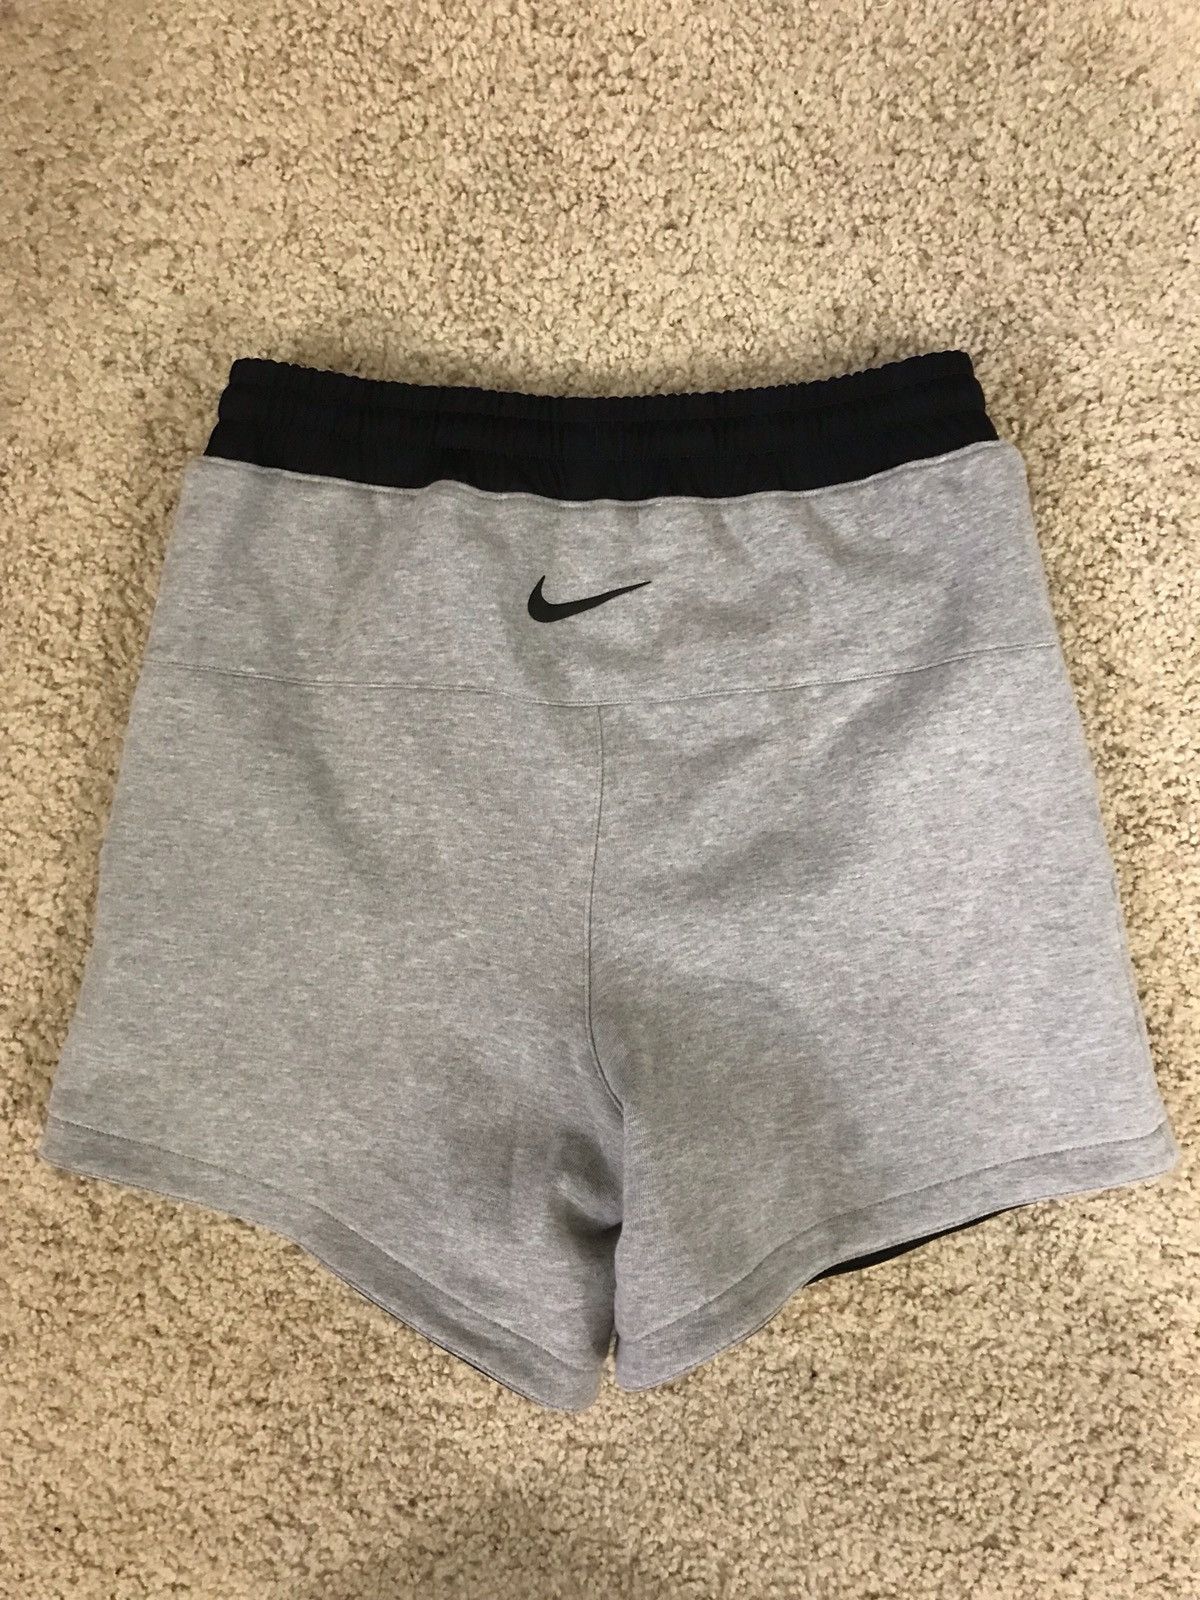 Nike FEAR OF GOD x Nike Reversible Shorts - size Small | Grailed